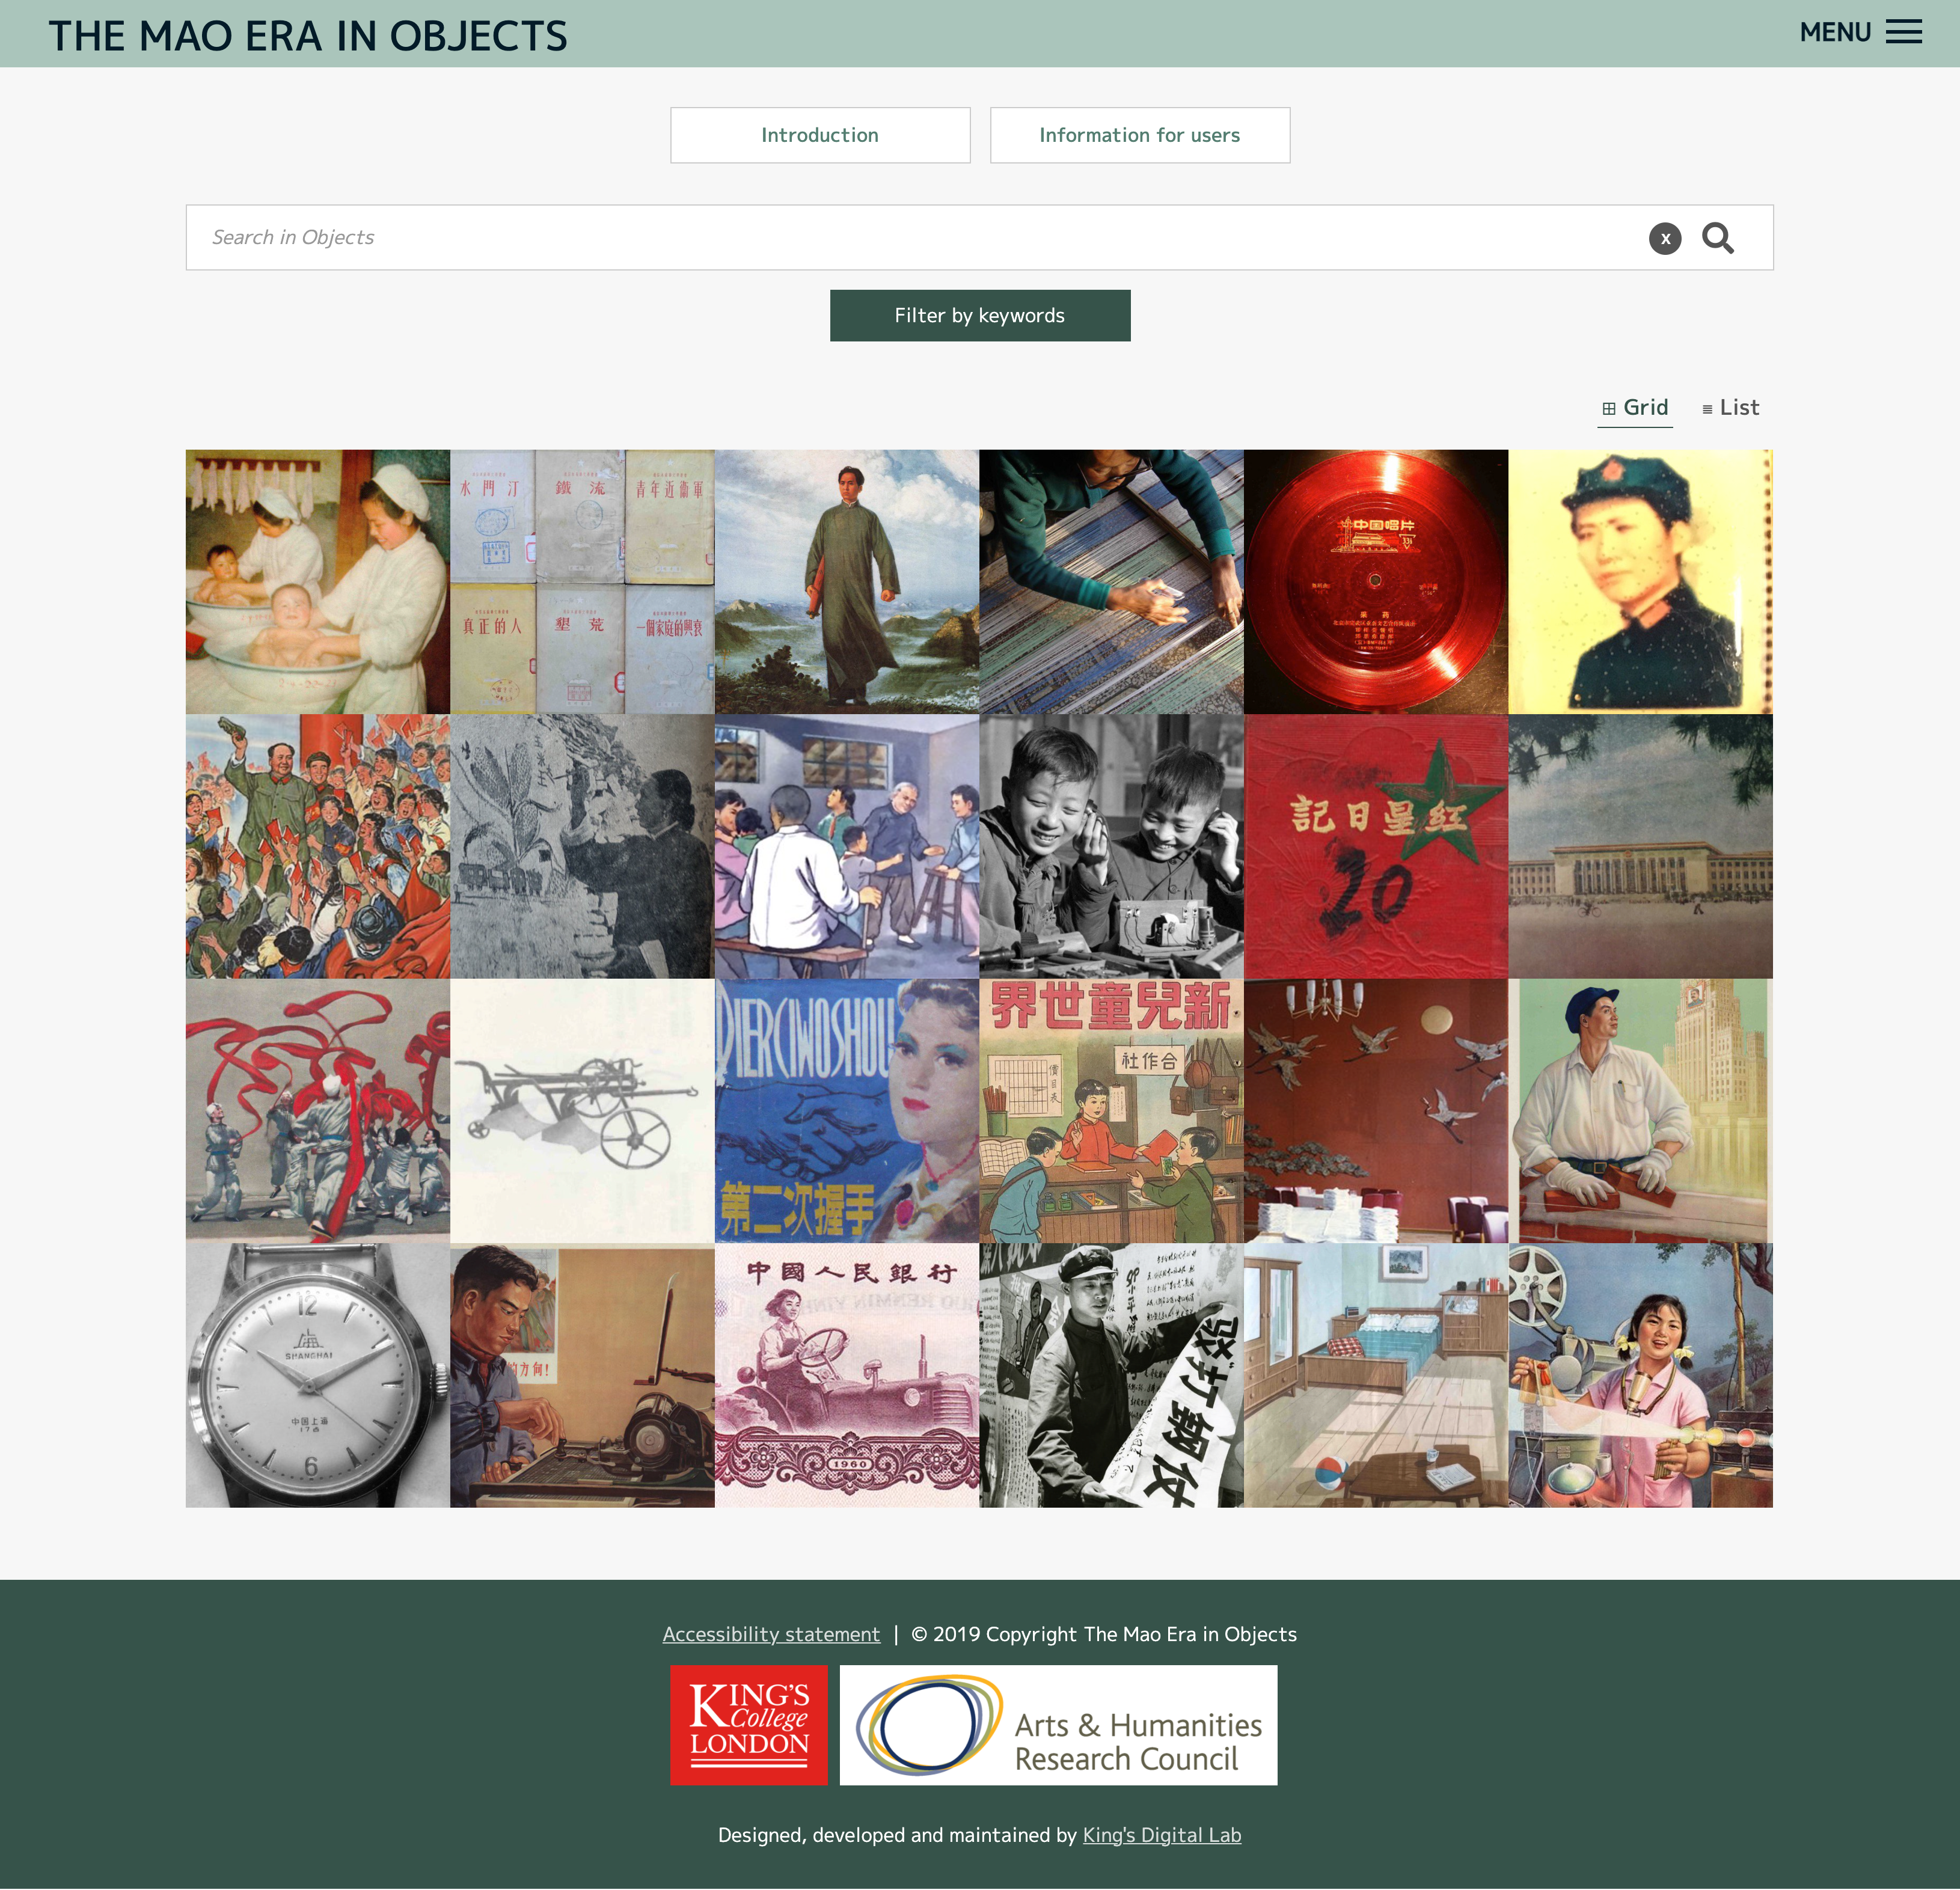 from top: title and menu, introduction and information button, search box, filter button, grid list option, collage of square images of a mix of Chinese illustrated posters, photograph of people and objects from the Mao era arranged in a grid, footer with logos and text